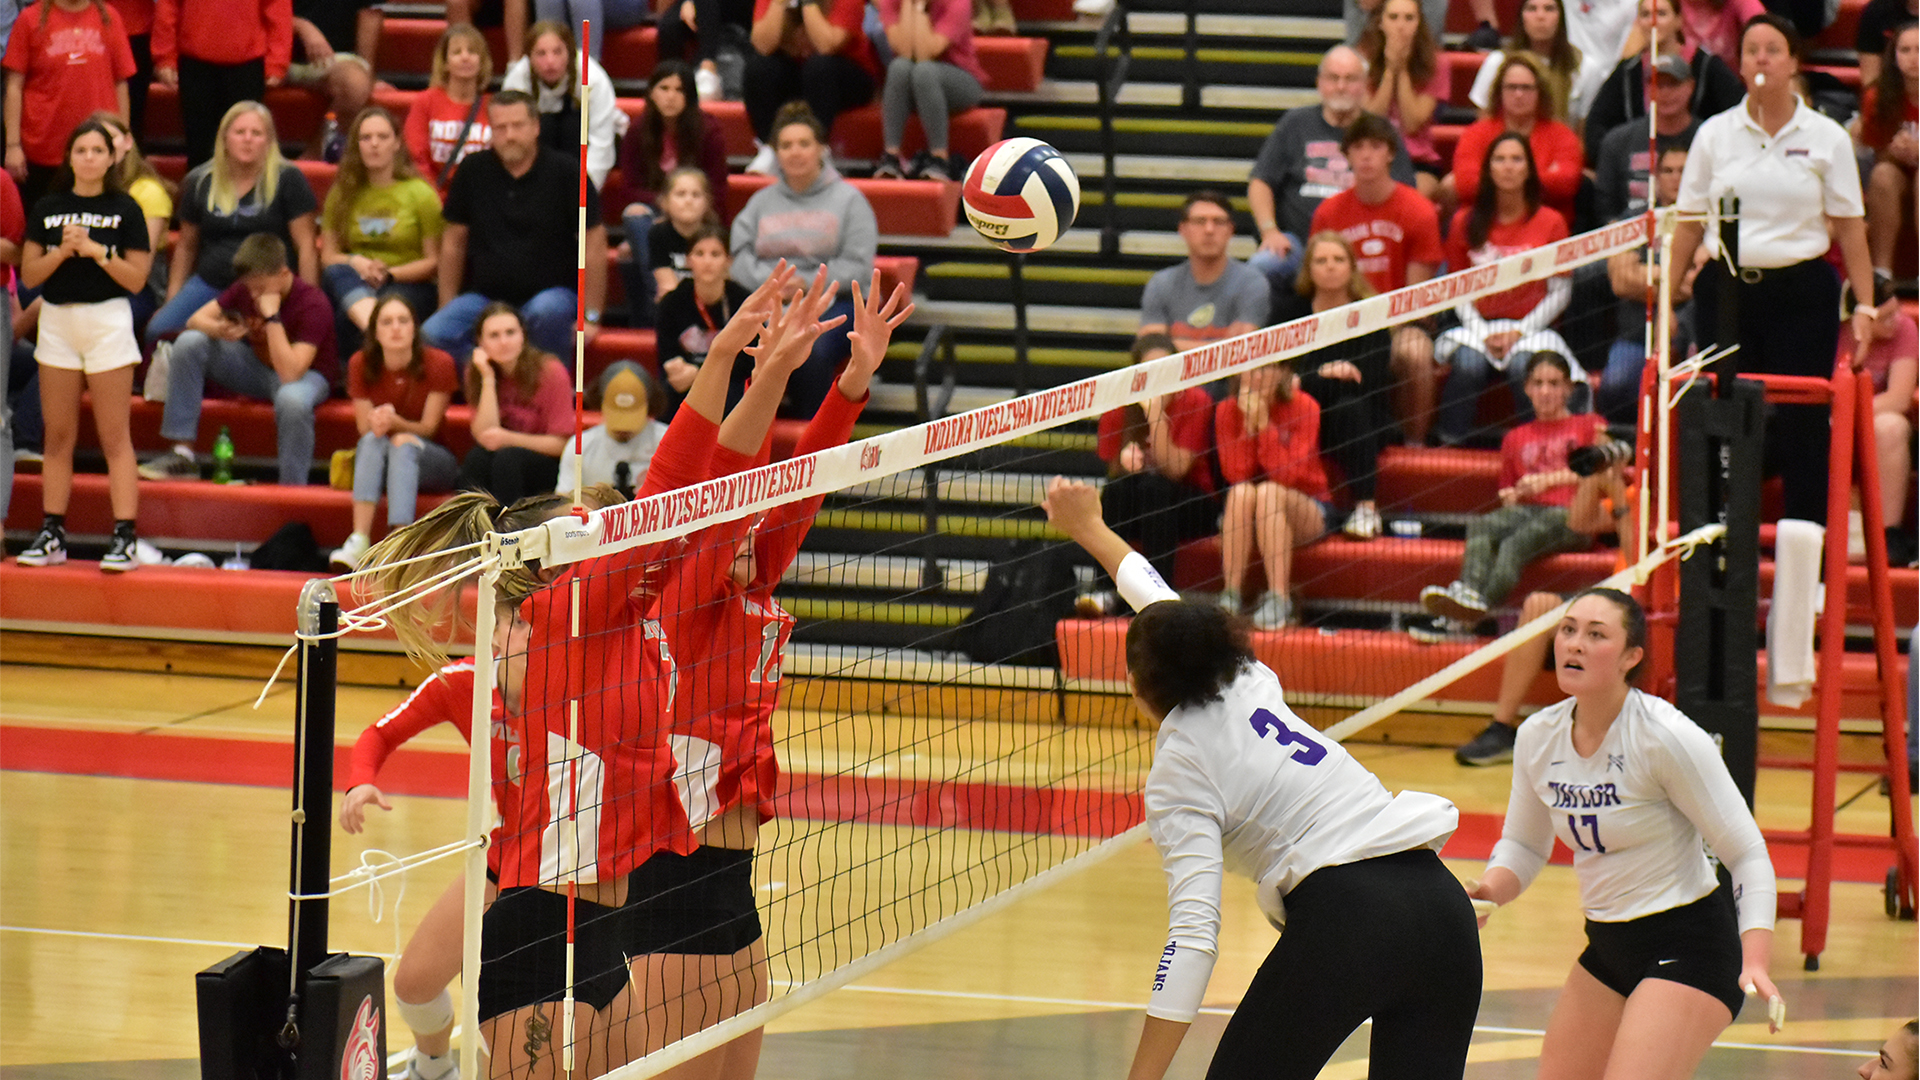 The Indiana Wesleyan volleyball team playing a match